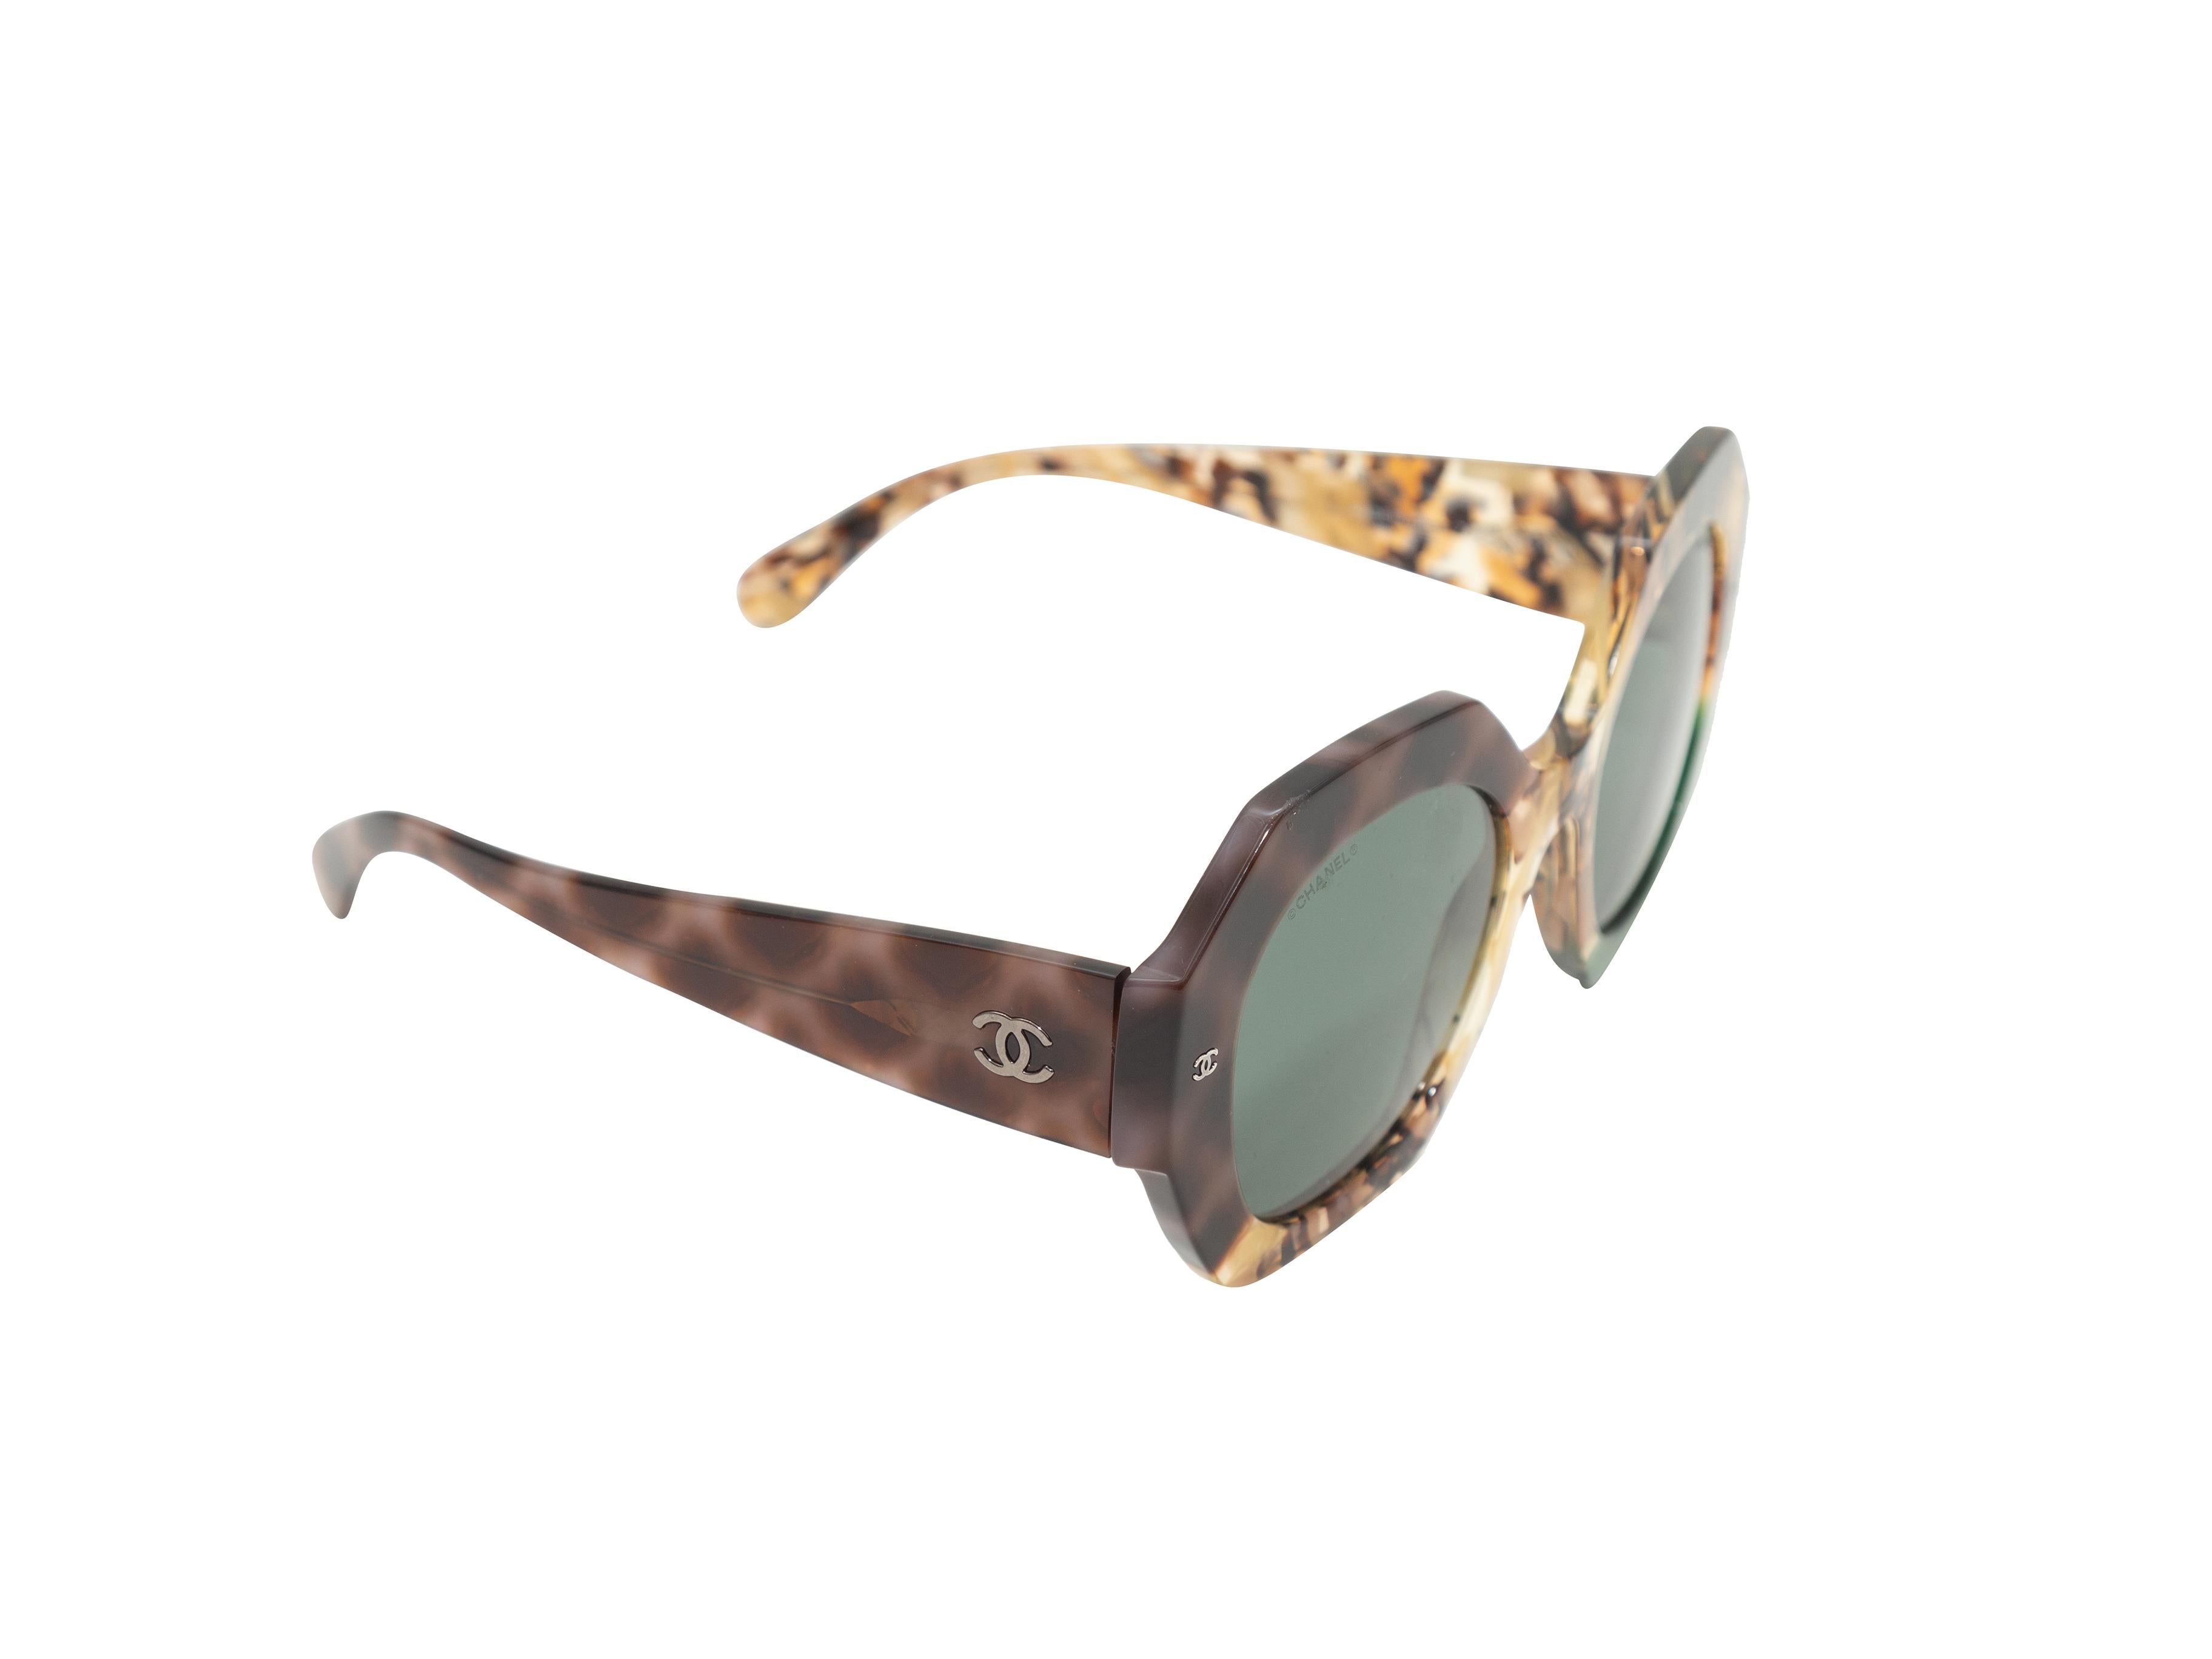 Product details: Brown and green oversize heptagon sunglasses by Chanel. Grey tinted lenses. 2.5